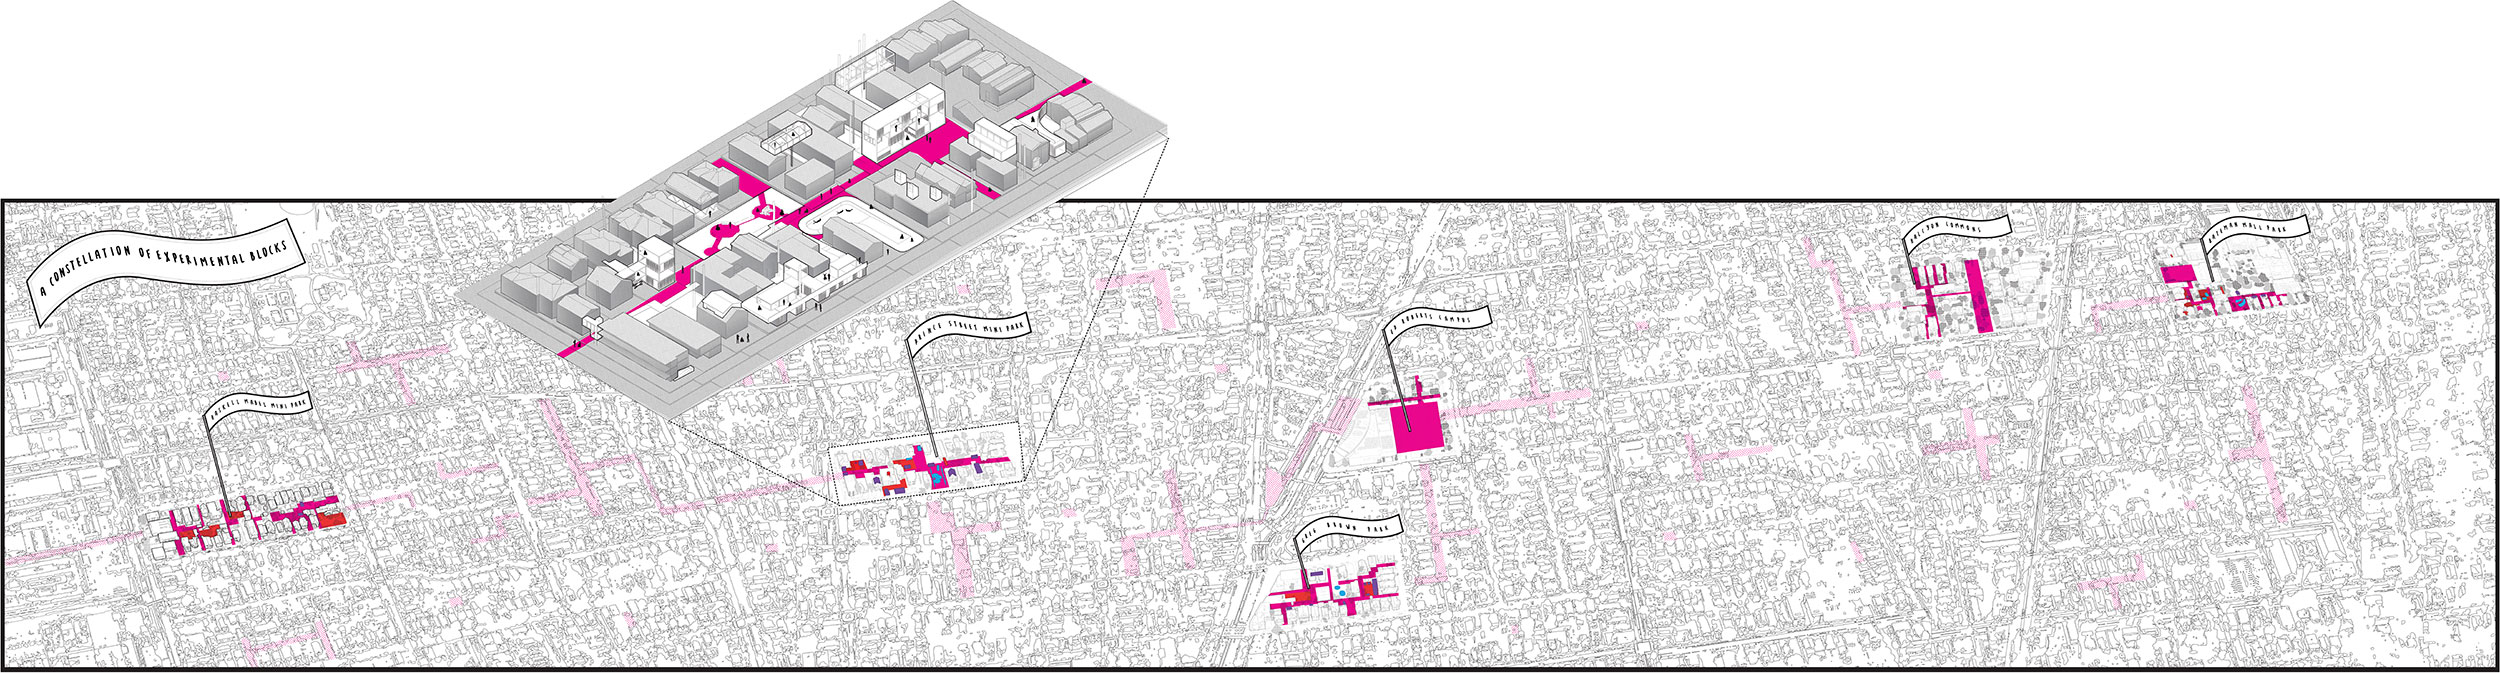 Illustration of an aerial neighborhood map, with a title caption reading “A Constellation of Experimental Blocks” and a central portion enlarged by an axonometric plan hovering above the map. Six flags identify different zones within the map, each titled with the texts, reading from left to right, “Haskell Mabel Mini Park,” “Prince Street Mini Park,” “Ed Roberts Campus,” “Greg Brown Park,” “Halycon Commons,” and “Bateman Mall Park.” 